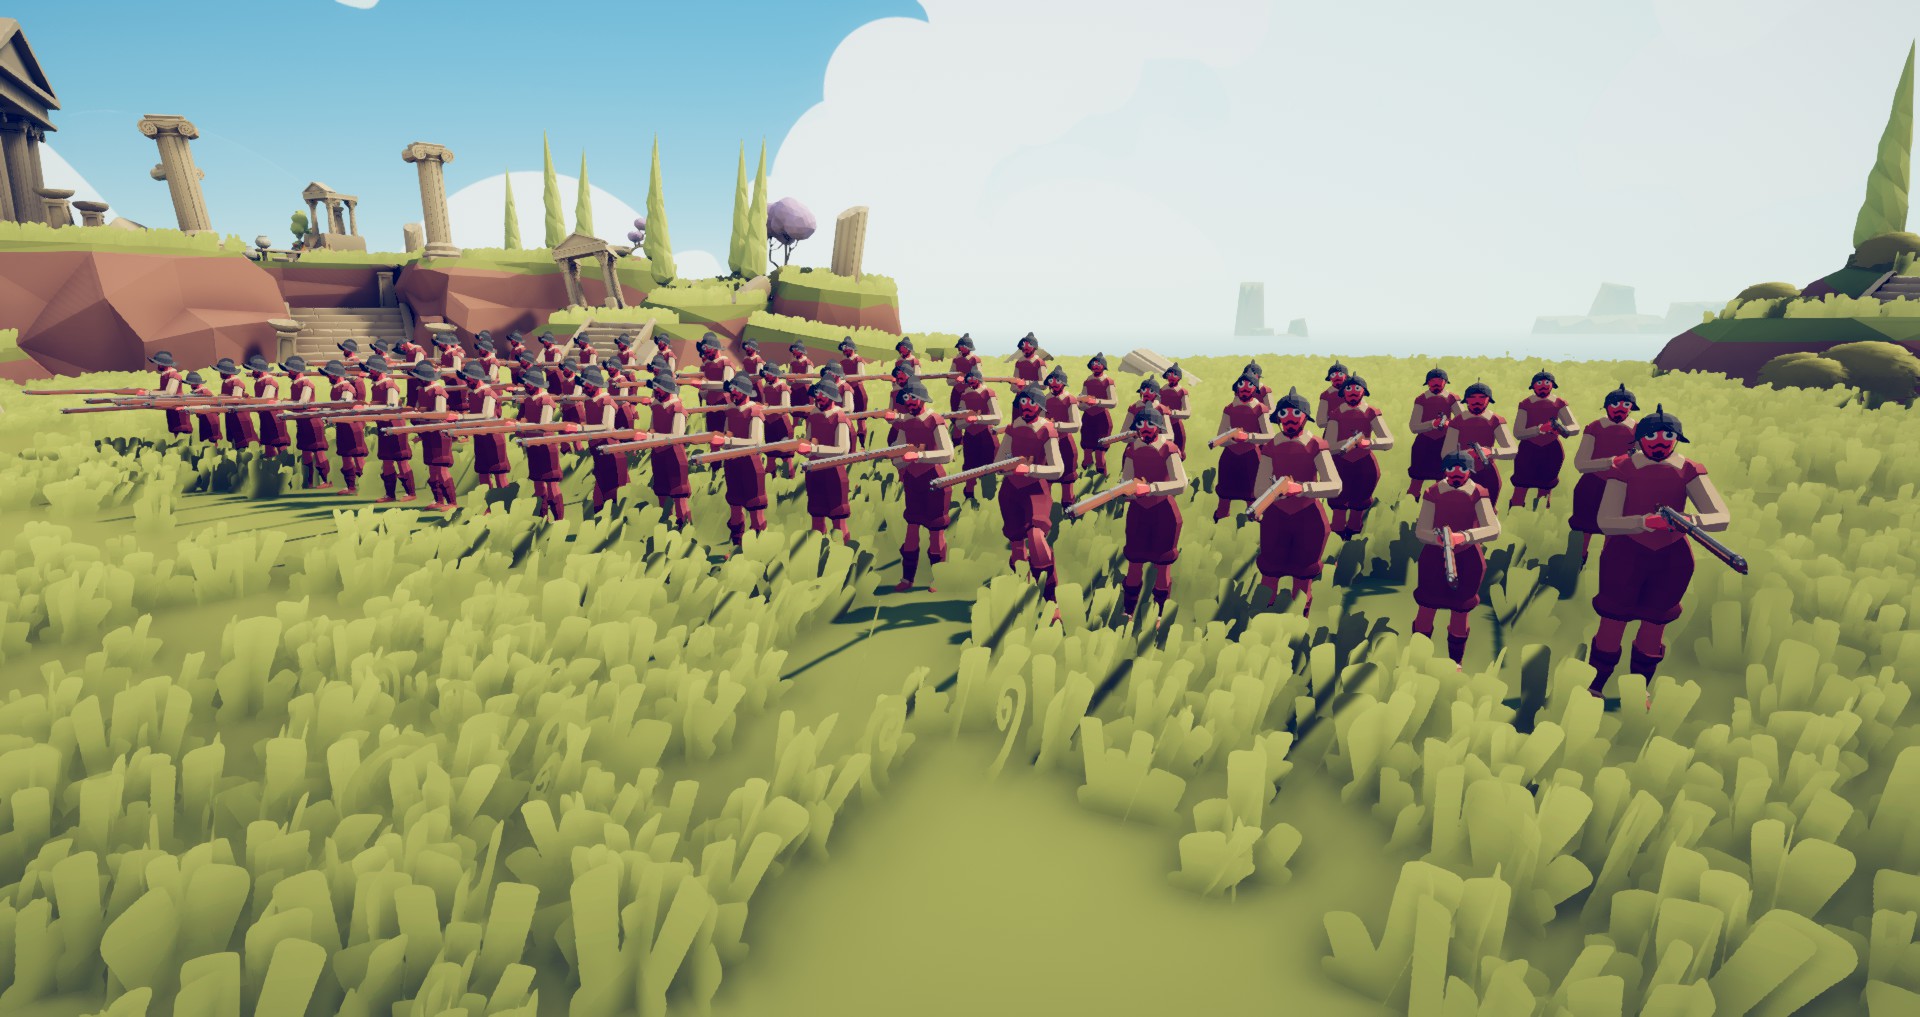 totally accurate battle simulator update download